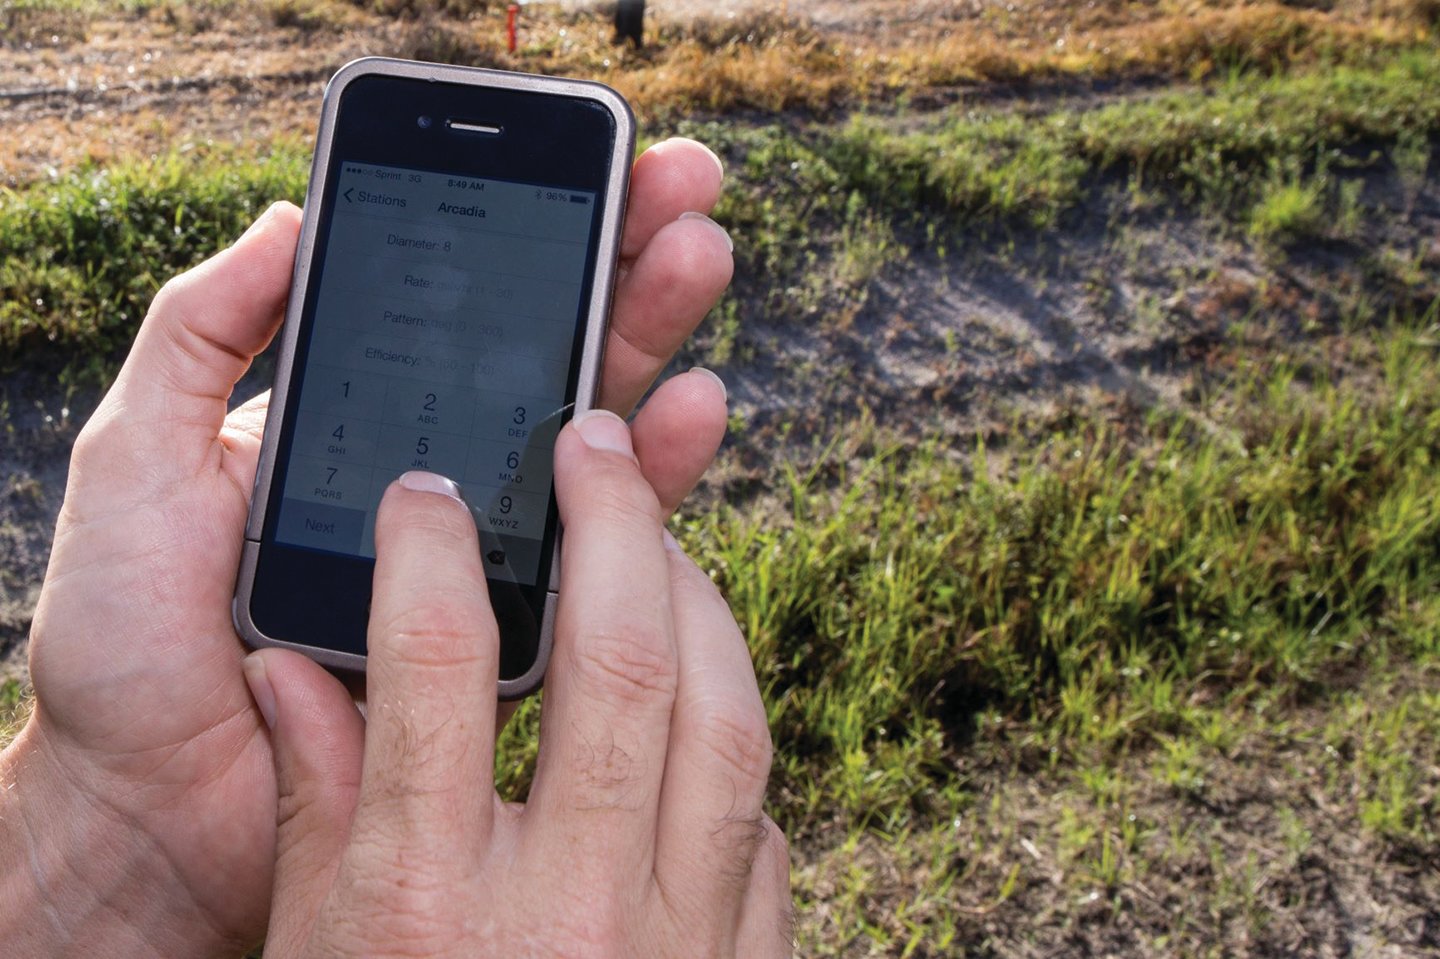 A new UF/IFAS app, similar to the one shown here, helps users identify and avoid toxic plants.